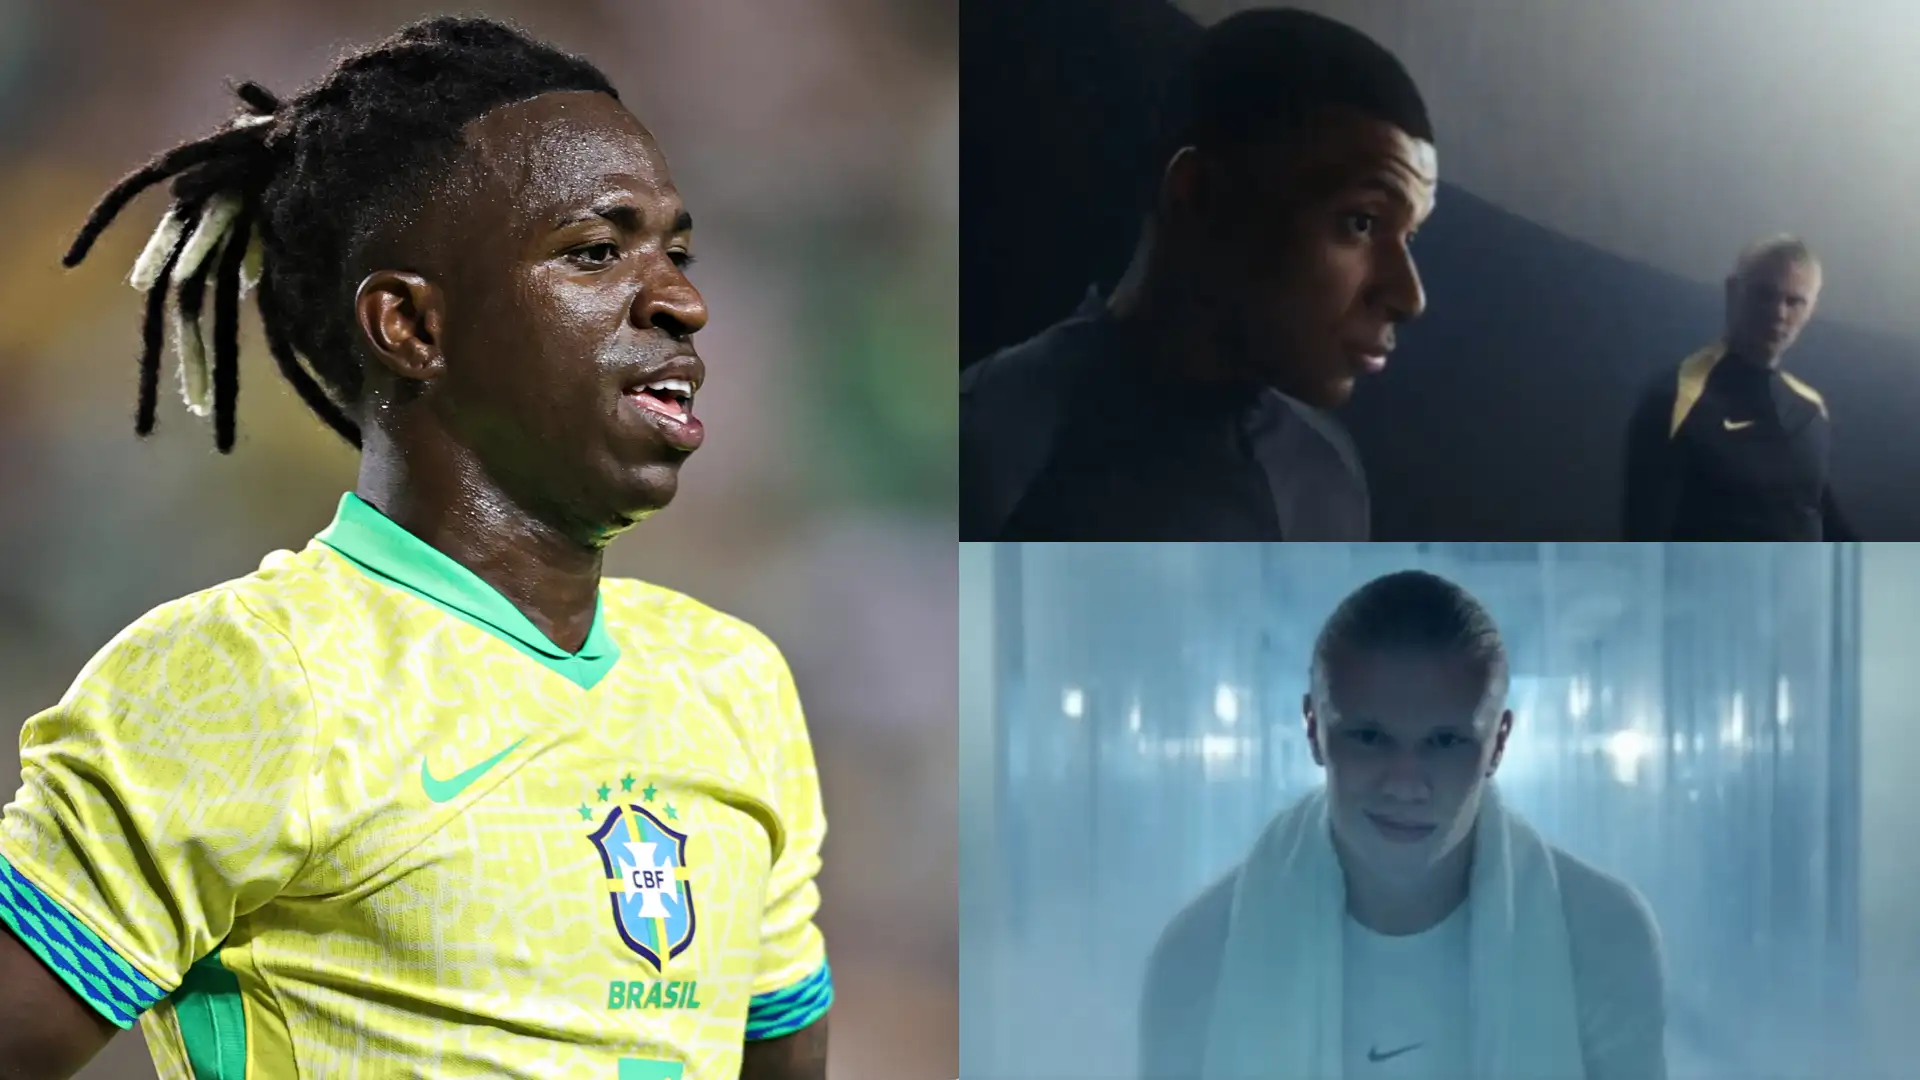 VIDEO: Kylian Mbappe, Erling Haaland & Vinicius Jr ‘awaken madness’ in epic Nike advert alongside Ronaldinho – with speculation suggesting superstar trio may yet be united at Real Madrid